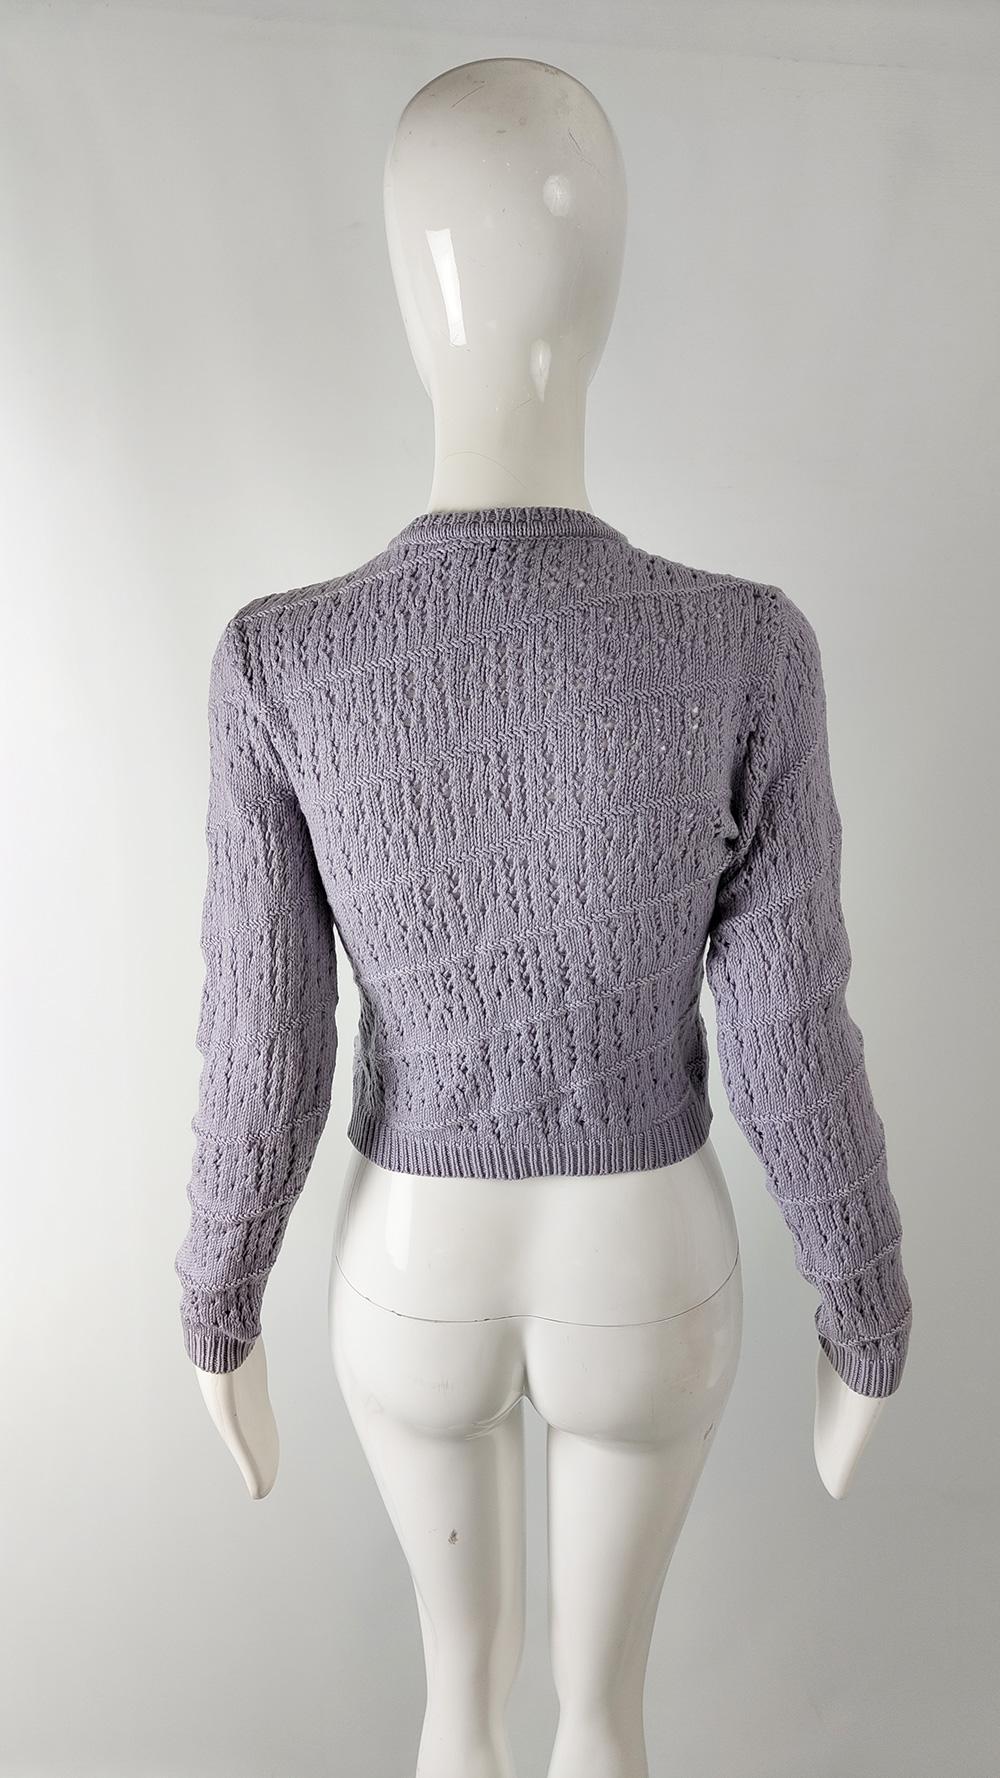 Gianni Versace Versus Pastel Purple Lavender Virgin Wool Knit Sweater Jumper In Good Condition For Sale In Doncaster, South Yorkshire